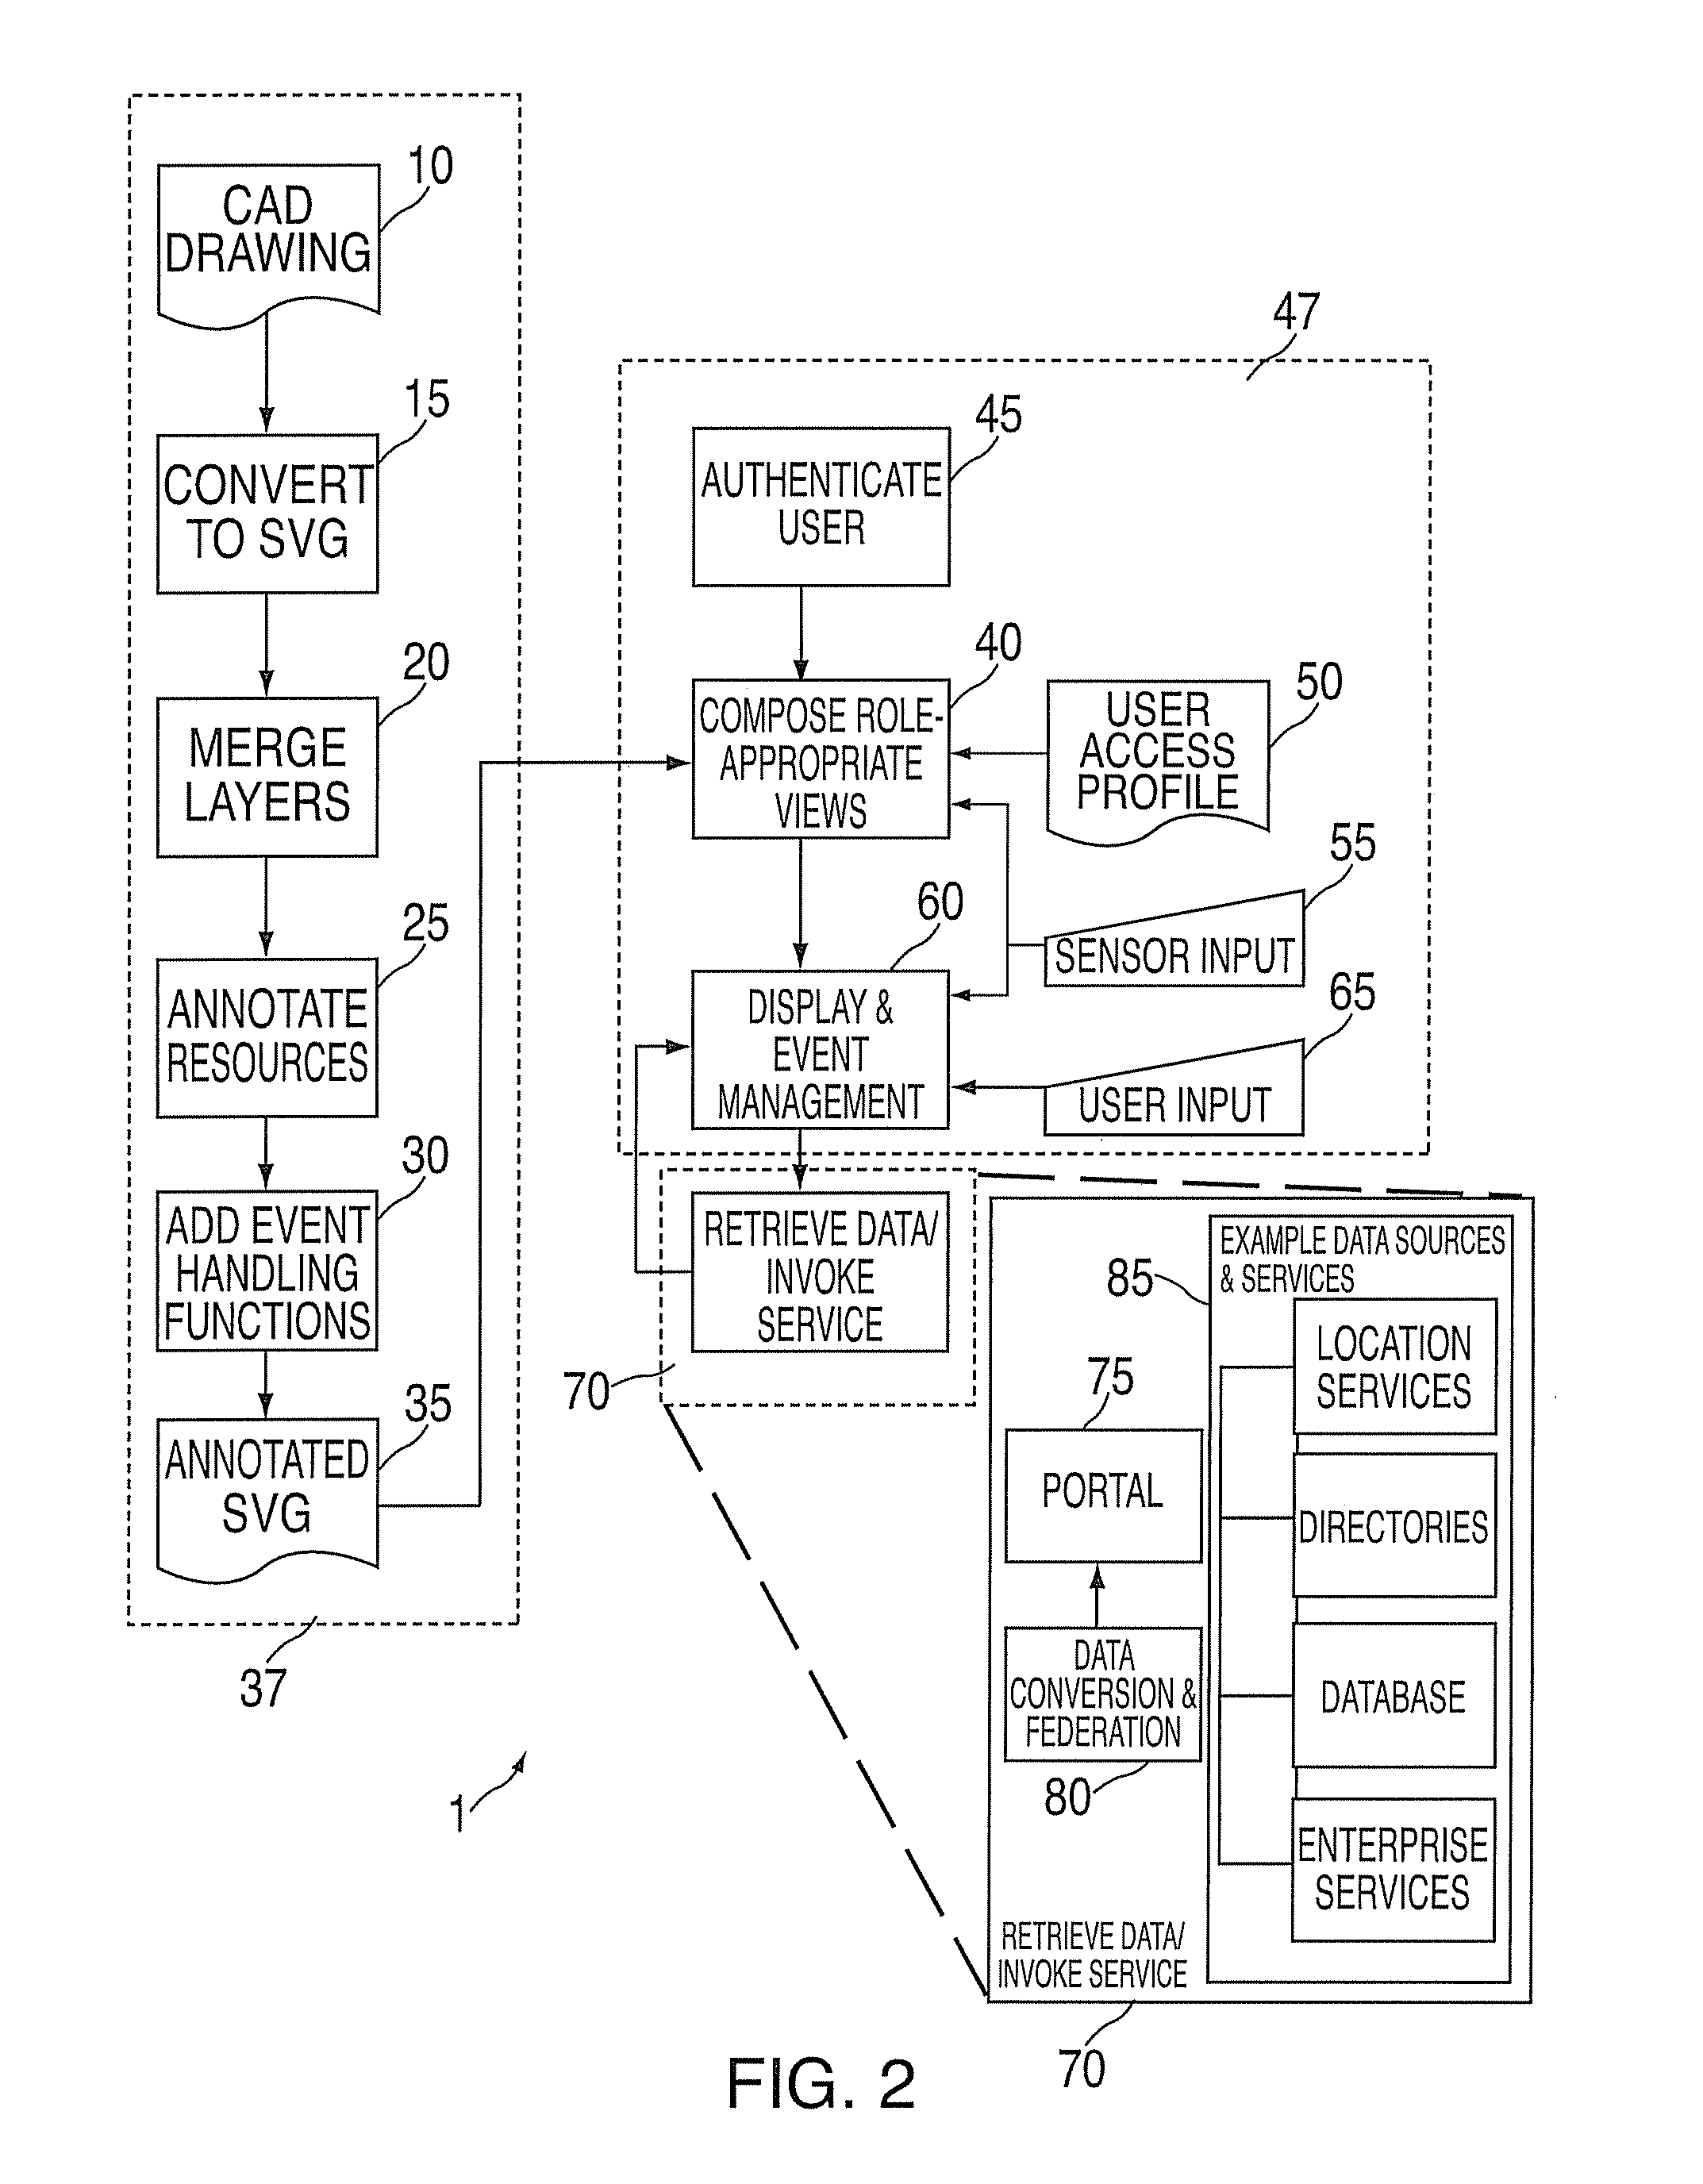 System and method for visualization and interaction with spatial objects